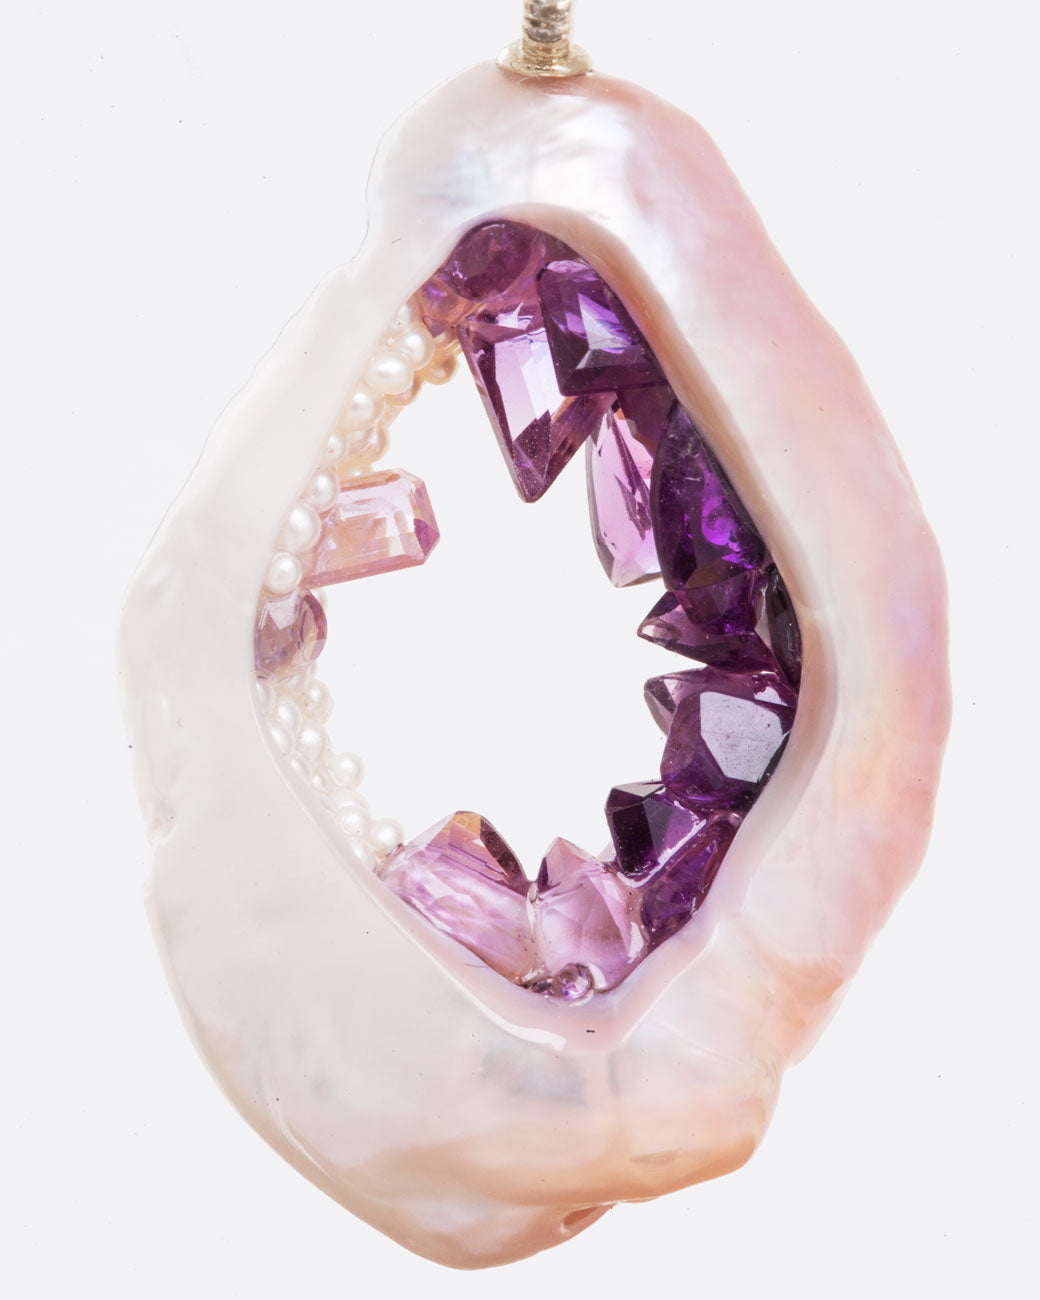 Very close up view of large souffle pearl with pink saturation gradient filled with pearls and amethysts following the color variation of the outer pearl